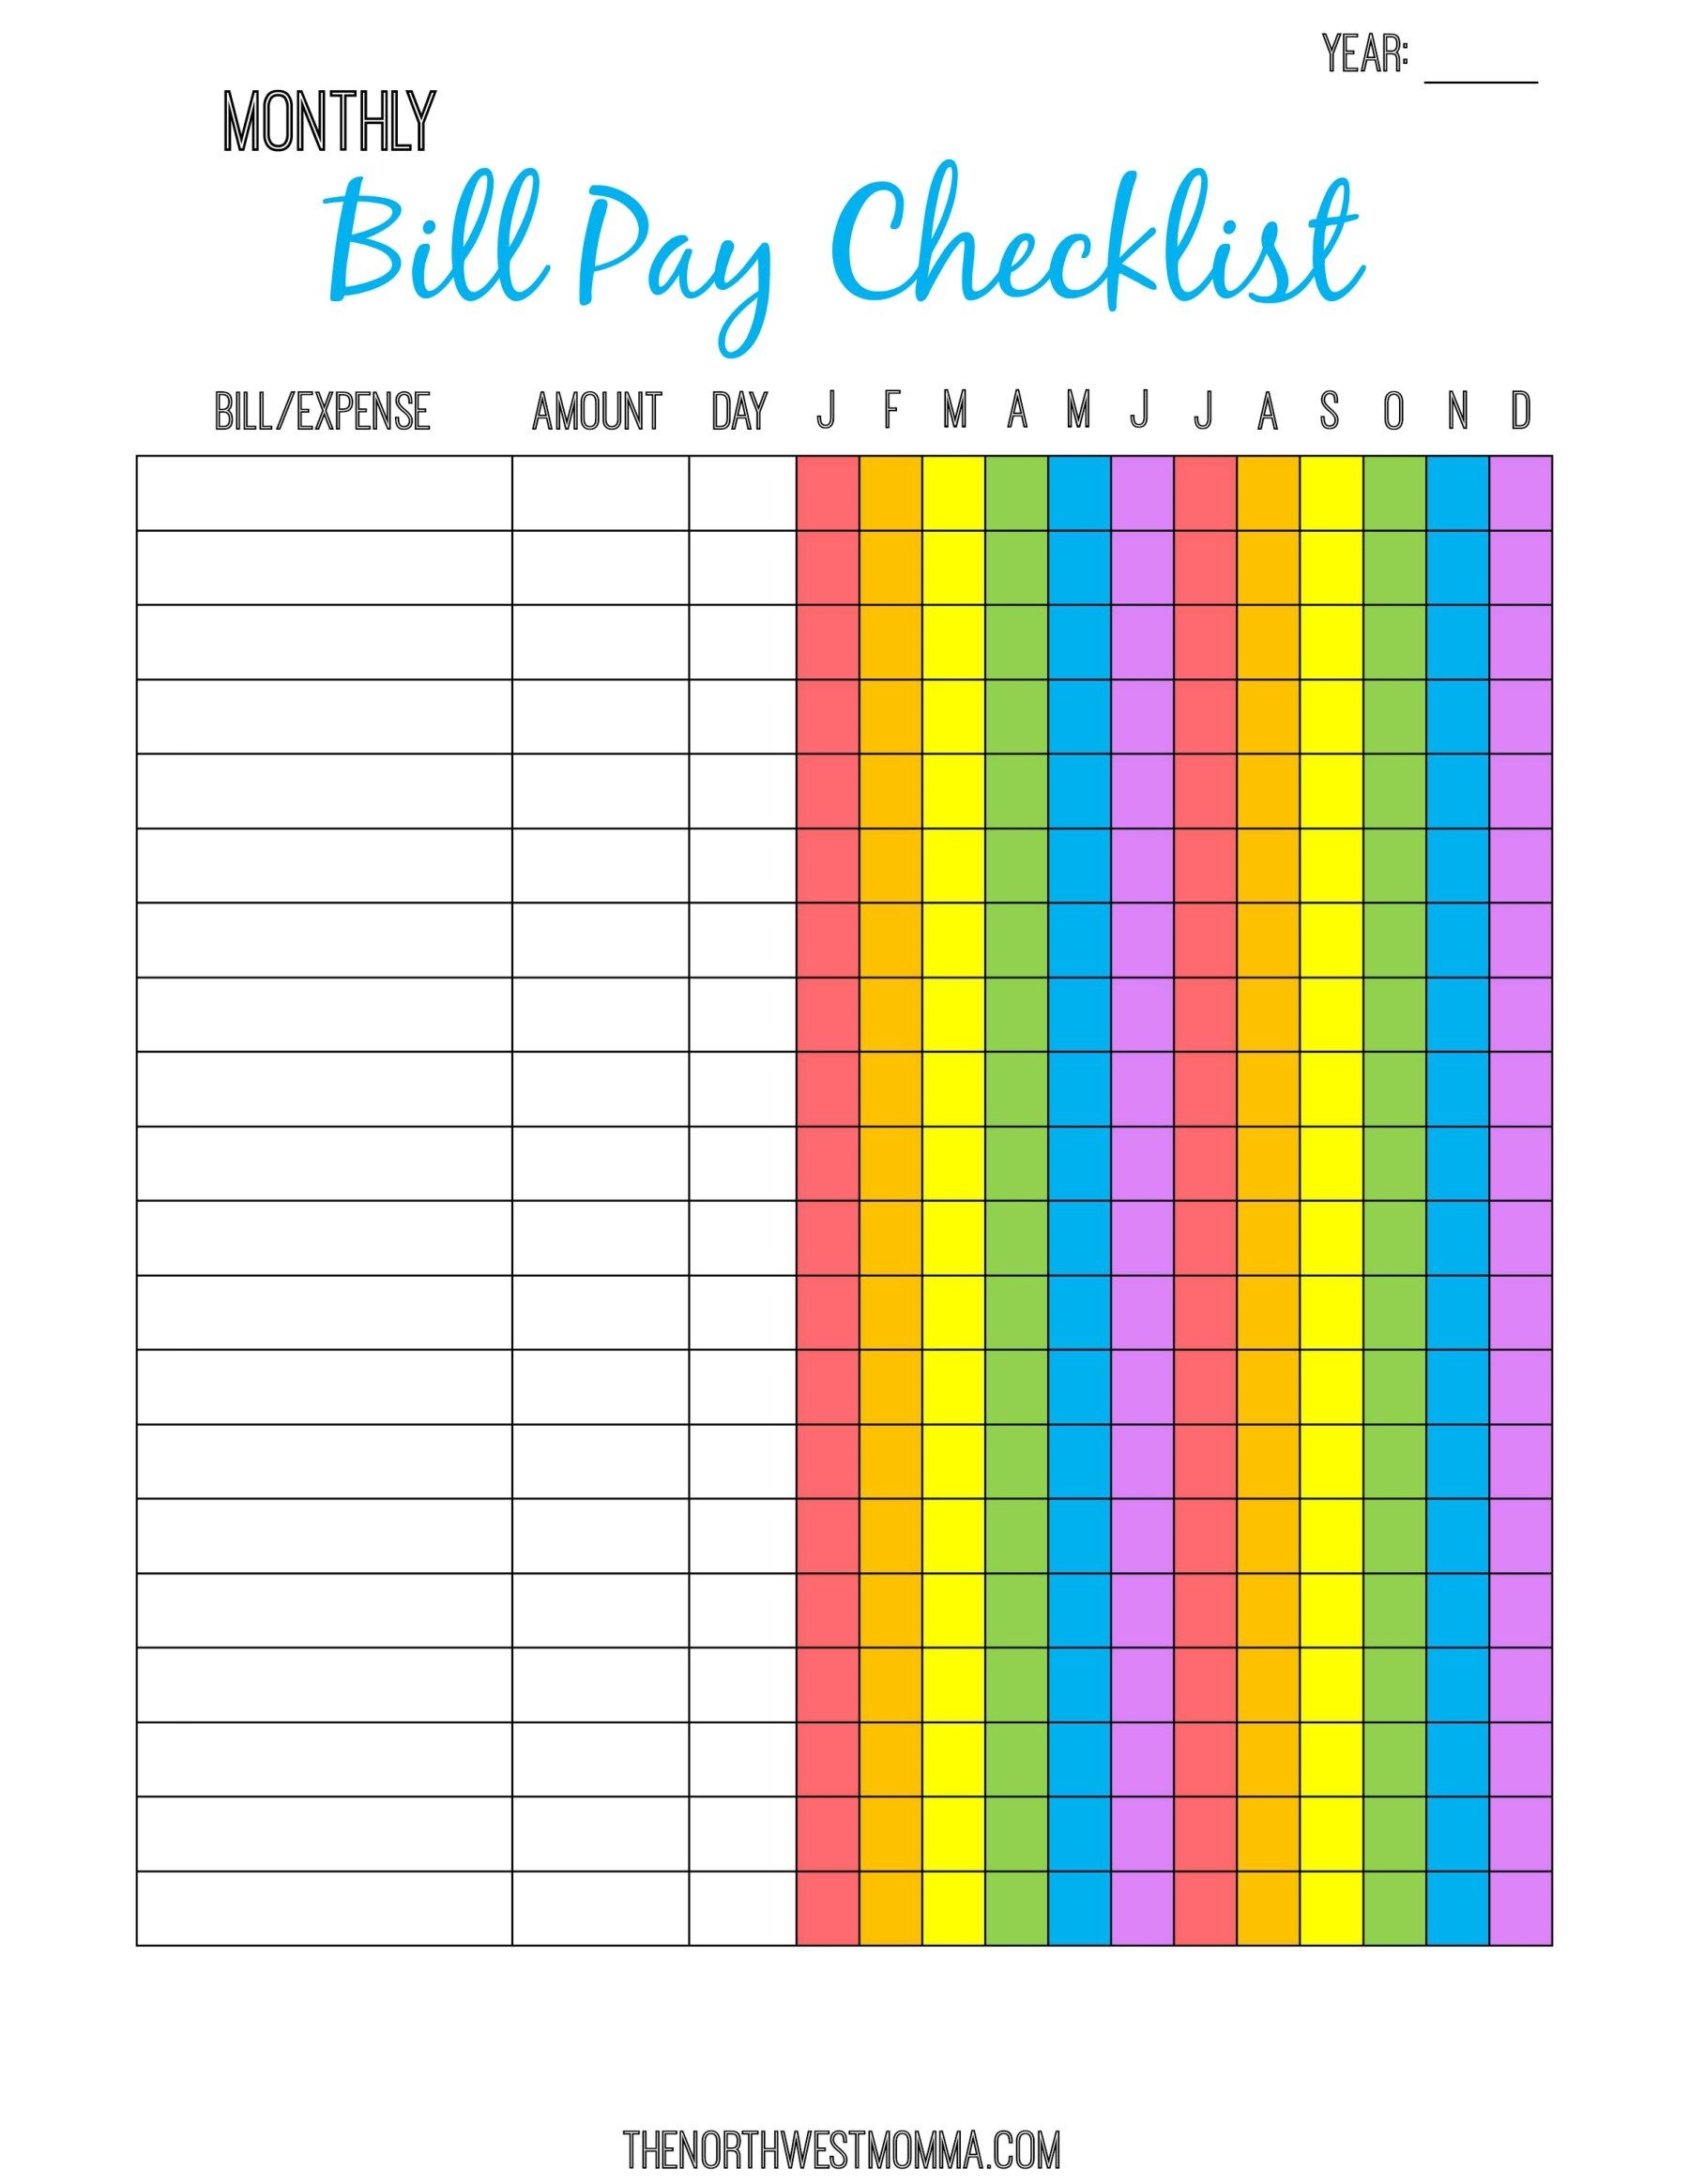 Monthly Bill Pay Checklist- Free Printable! | $ Saving Money - Free Printable Monthly Bill Checklist